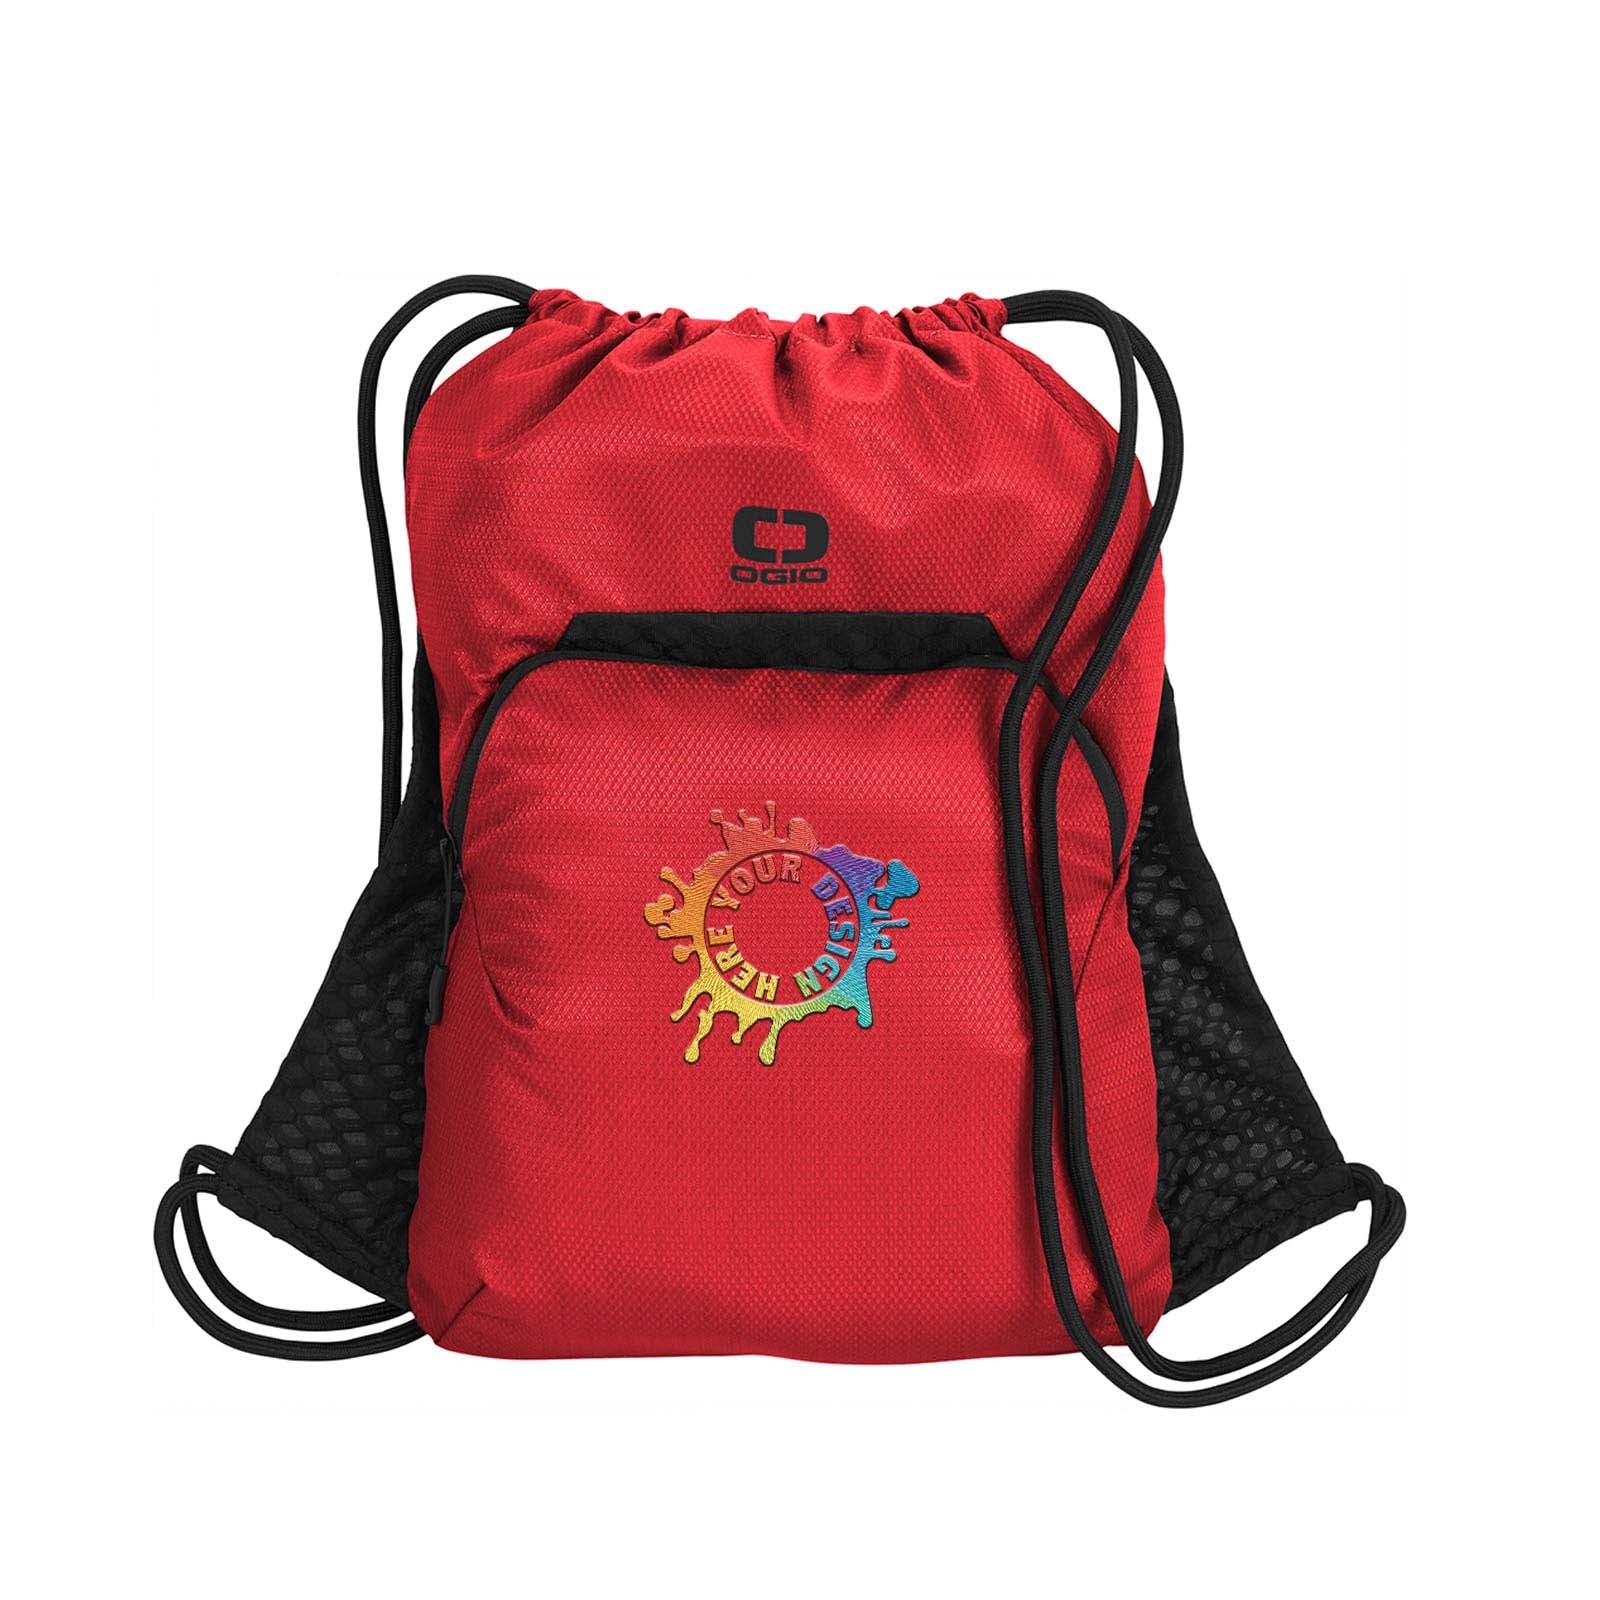 OGIO ® Boundary Cinch Pack Embroidery - Mato & Hash